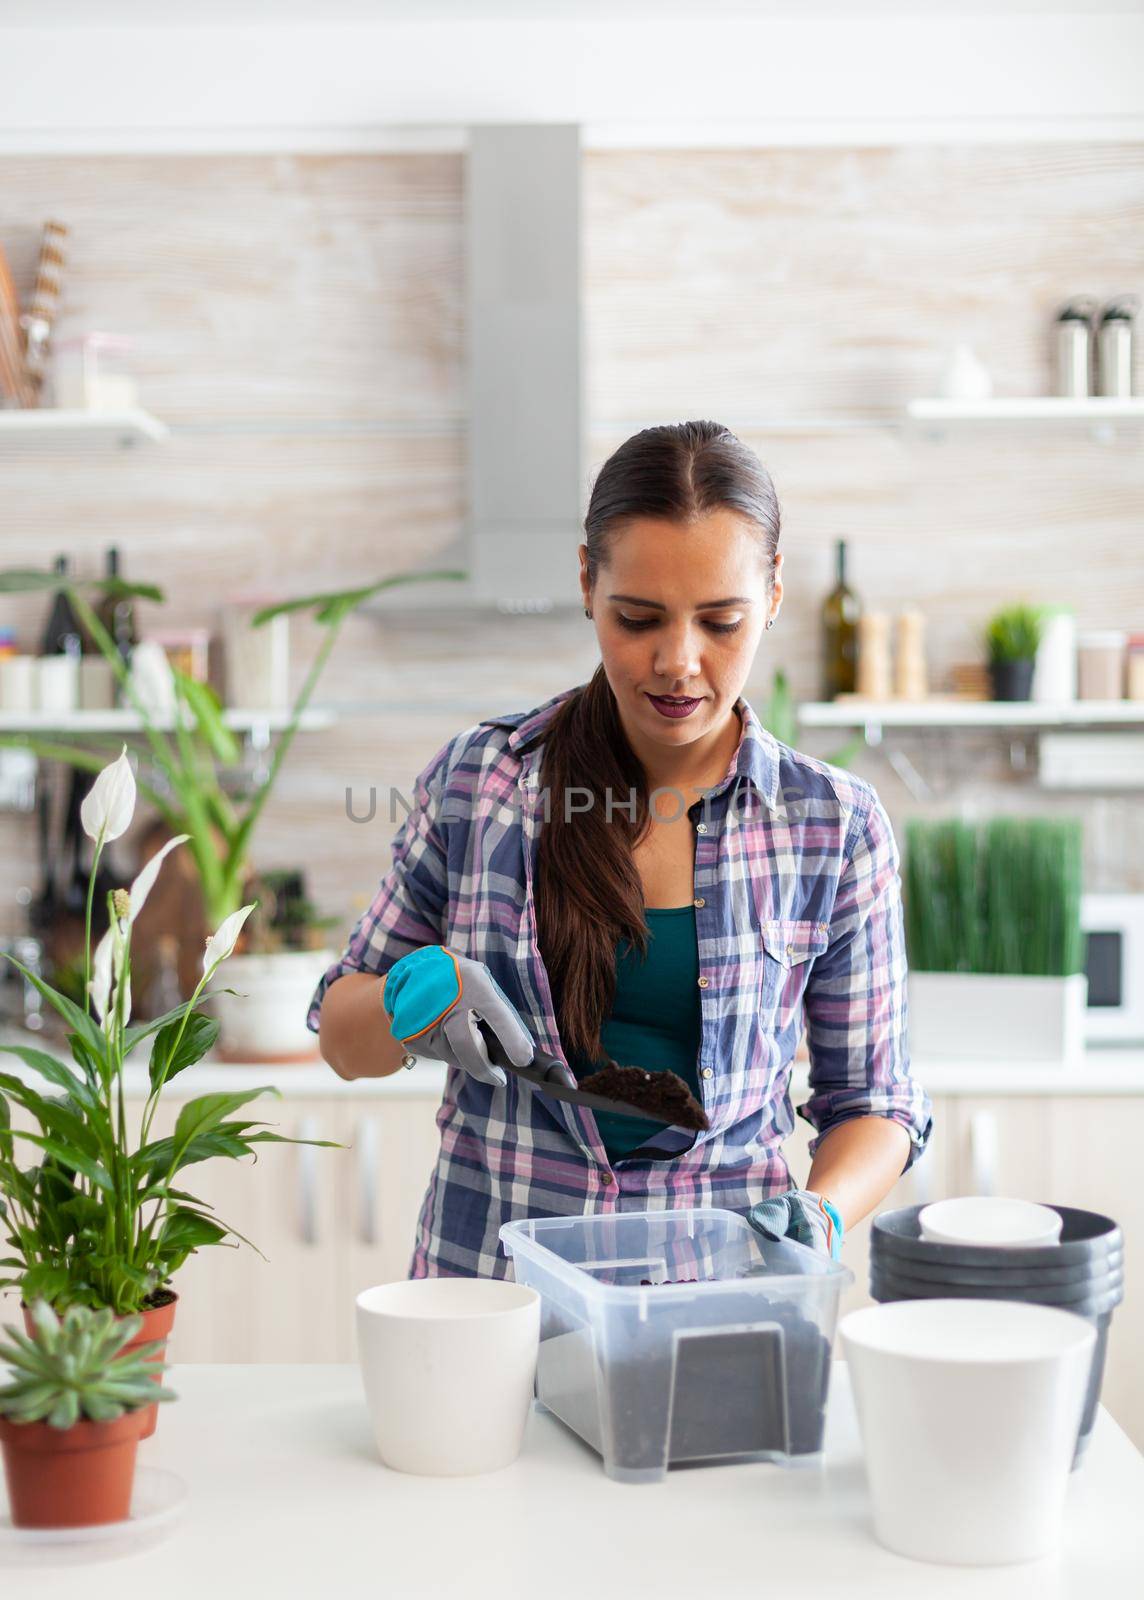 Housewife gardening in the kitchen at home using gloves and shovel. Decorative, plants, growing, lifestyle, design, botanica, dirt, domestic, growh, leaf, hobby, seeding, care, happy, green, natural,